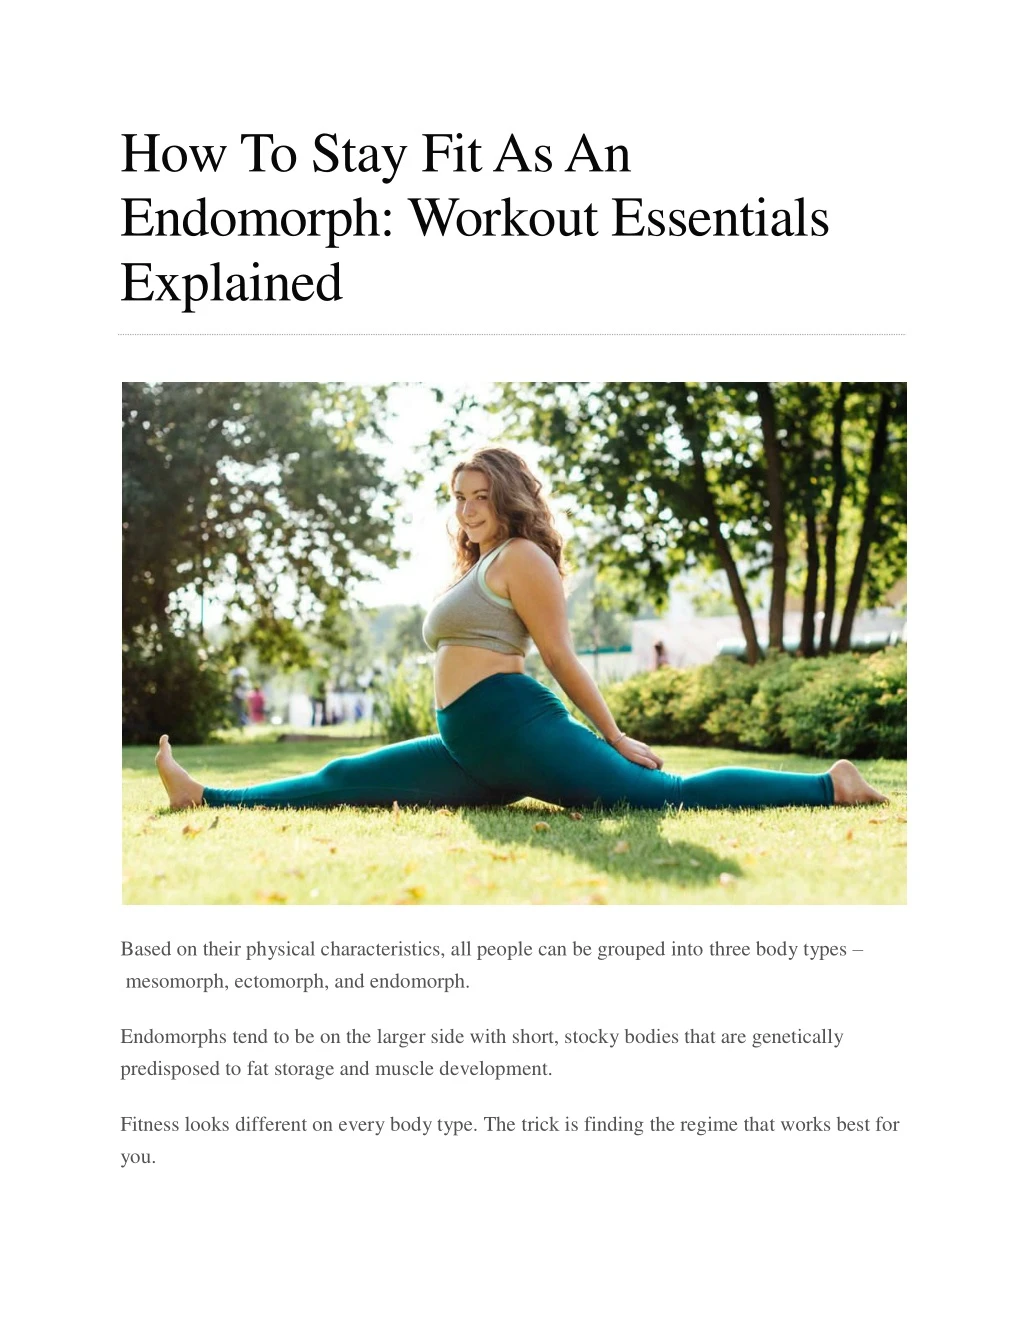 how to stay fit as an endomorph workout